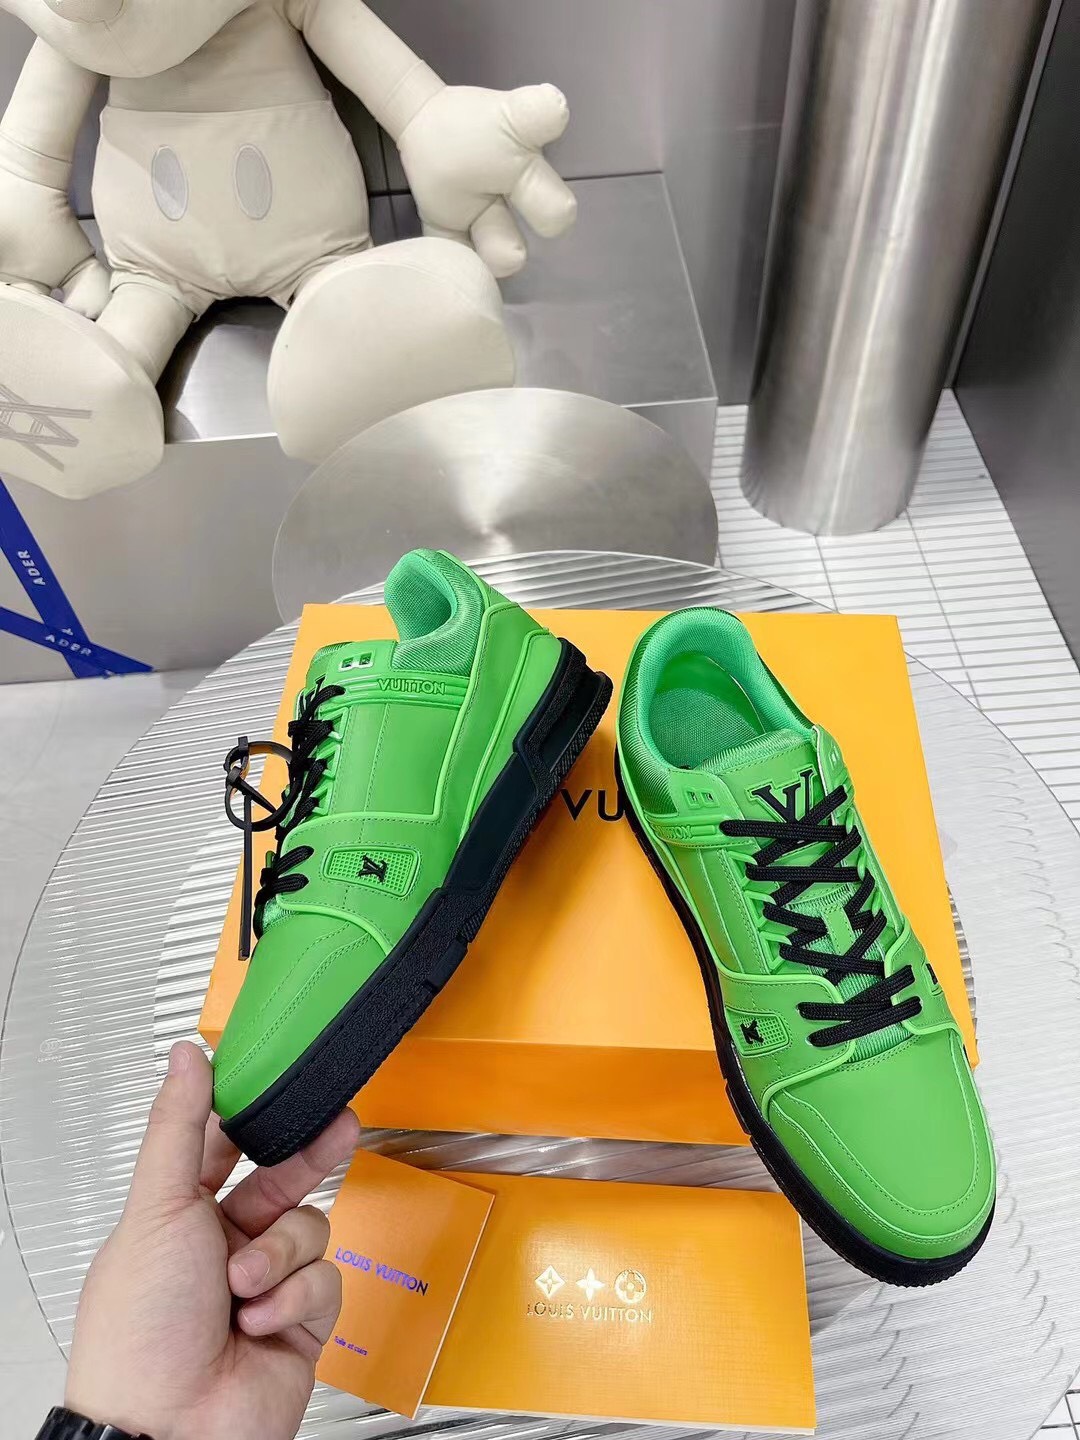 LV TRAINER SNEAKER X LV VIRGIL ABLOH - Replica Bags and Shoes online ...